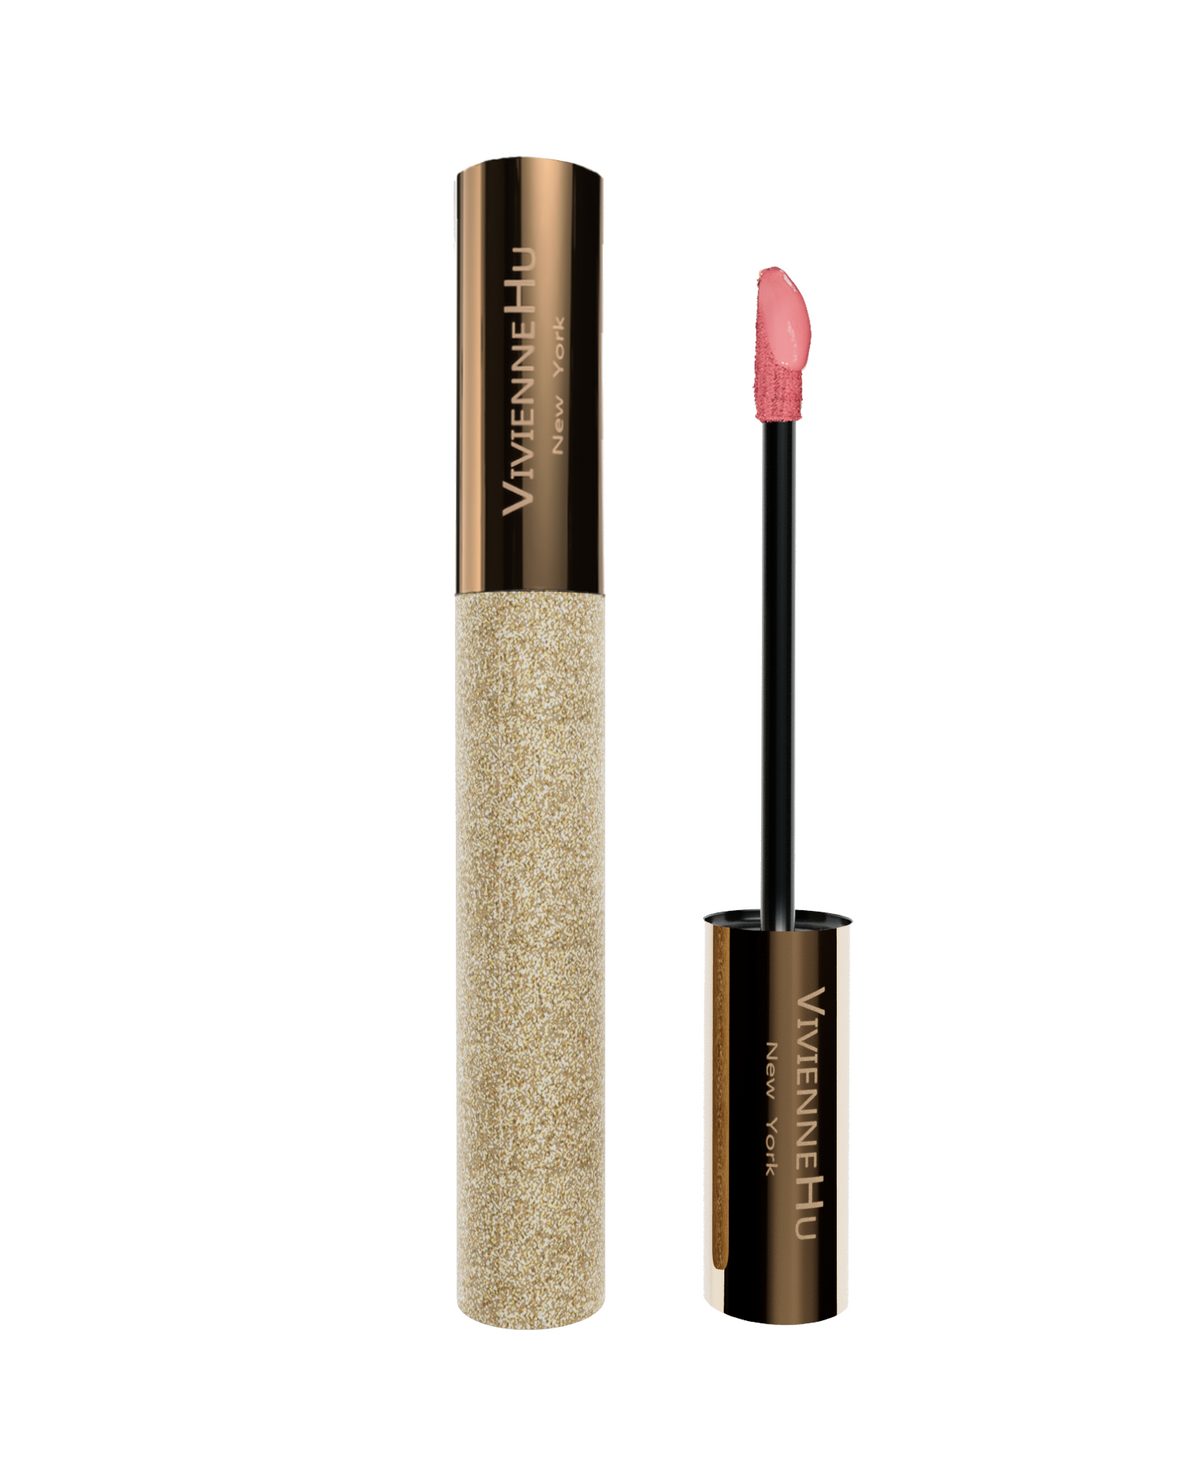 GOLDSAND LONG-TERM HYDRATION EFFECT LIP PLUMPING GLOSS – WITH HYALURONIC ACID|810 LIGHTBROWN